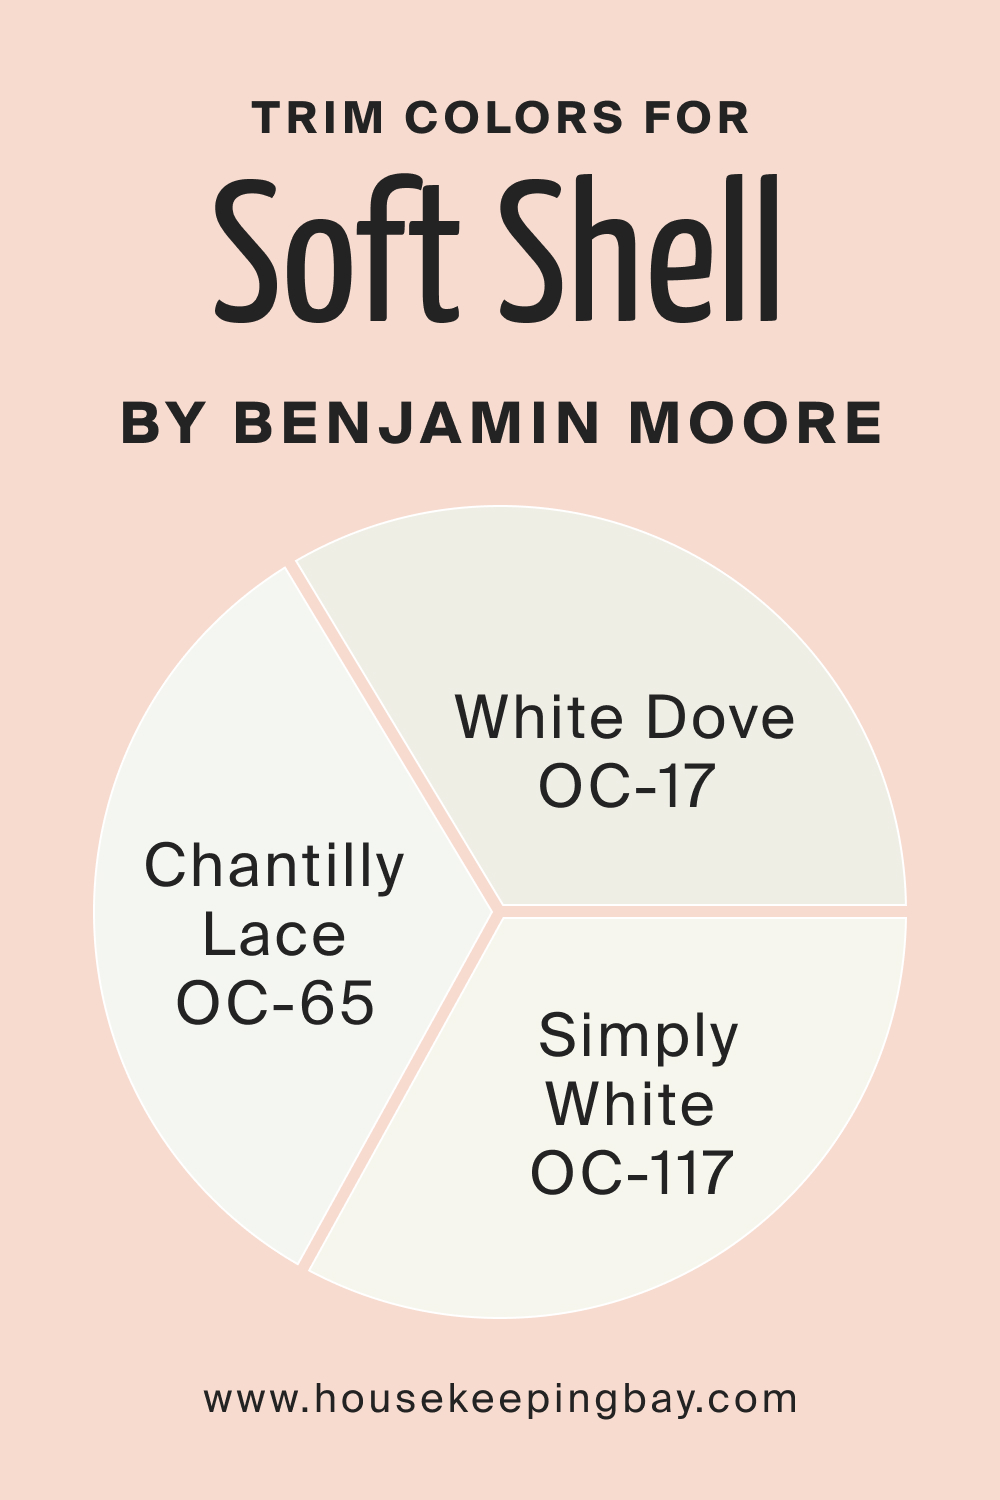 Trim Colors for Soft Shell 015 by Benjamin Moore